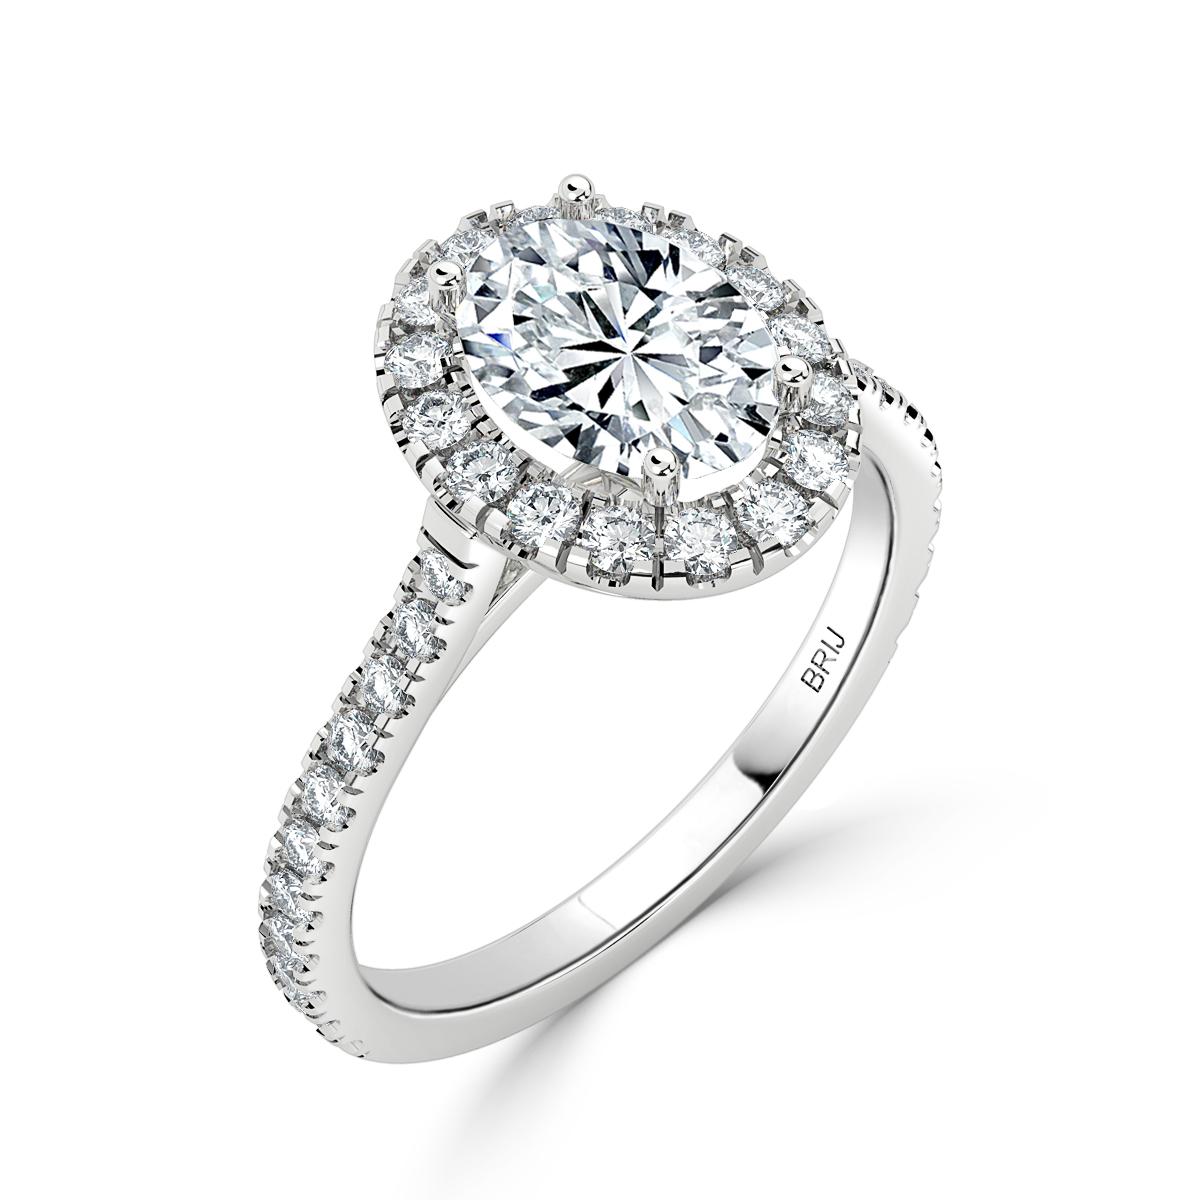 Simple, classic Diamond Halo engagement ring. Accented with 28 full cut diamonds along the shank  and Halo in a 18k White Gold setting. 
GIA certified round center stone 0.70 CT
Total Carat weight above 1.20 CT

GIA Certified Diamond Details
Weight: